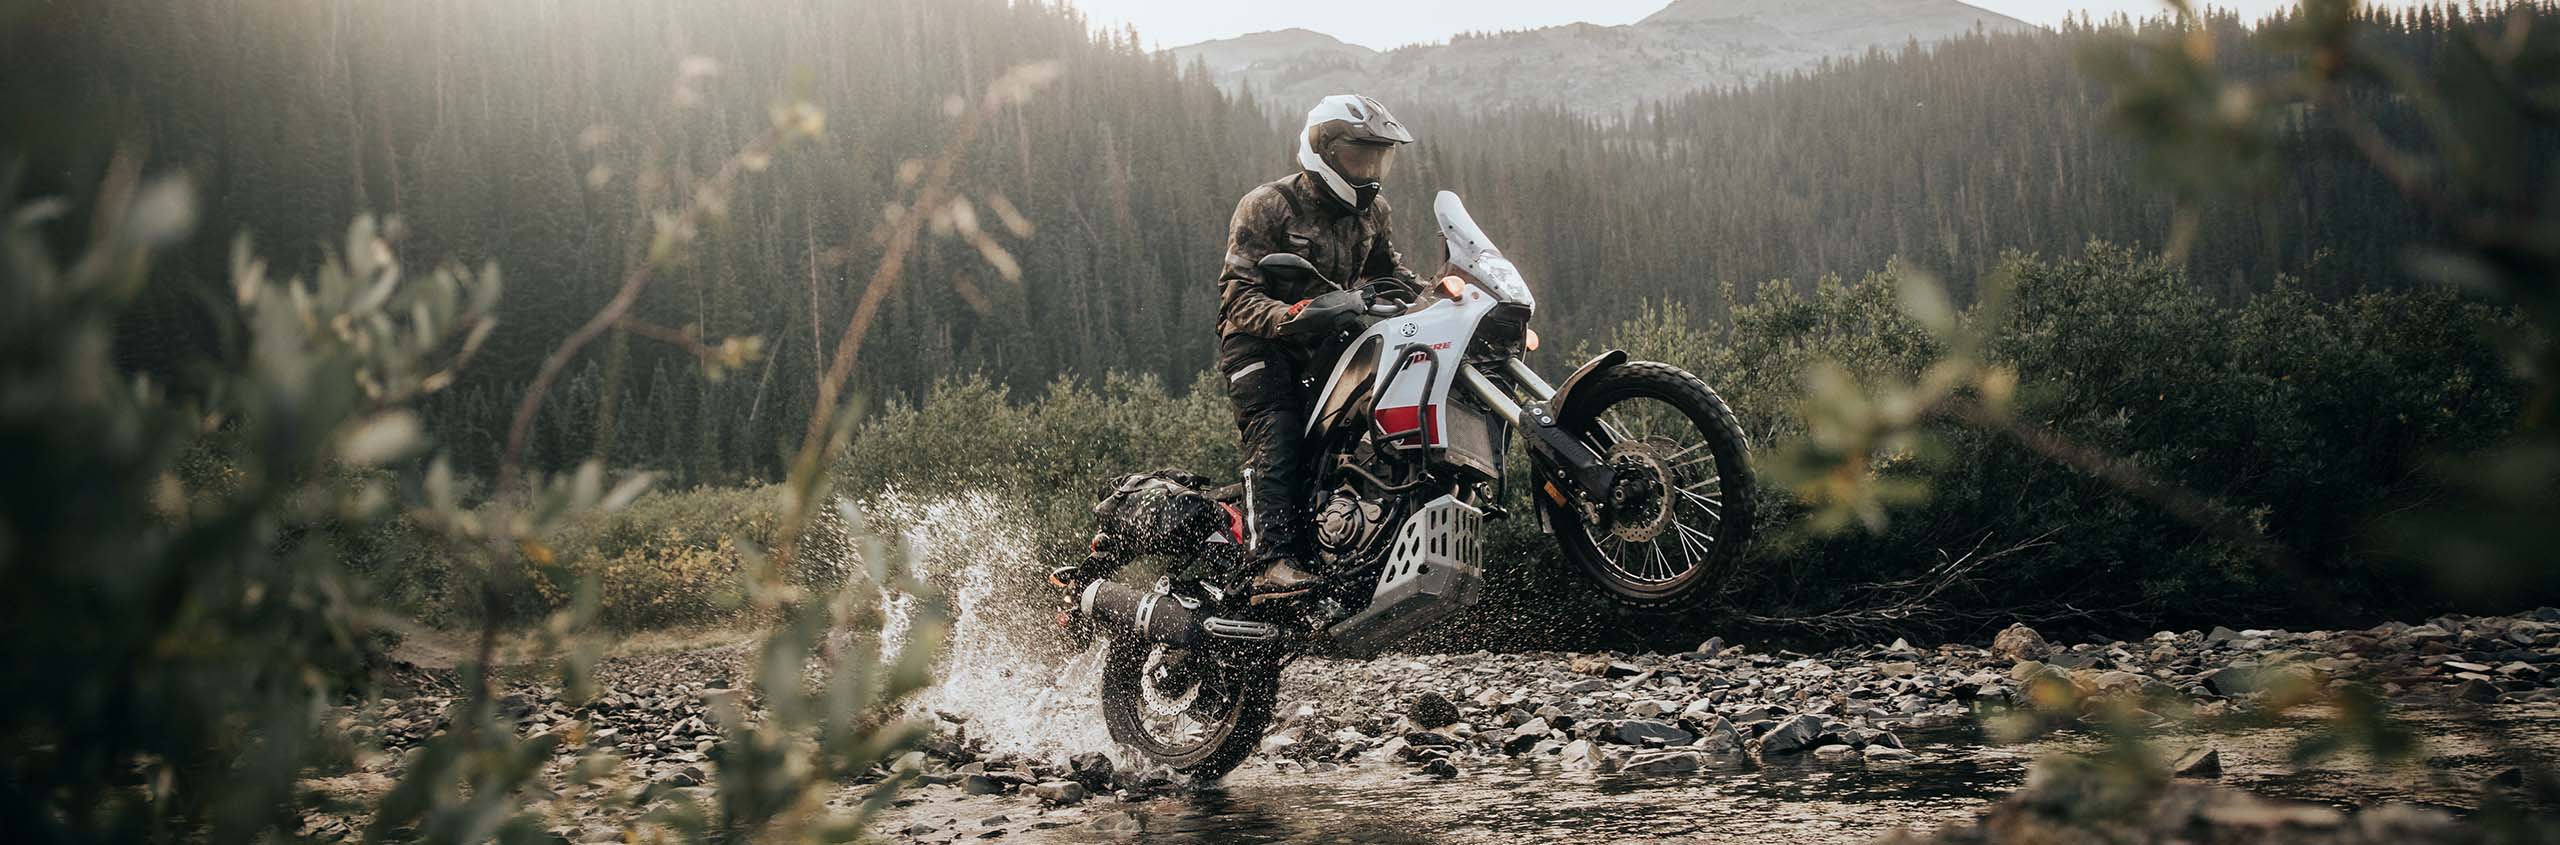 Adventure | Motorcycle Gear and Apparel